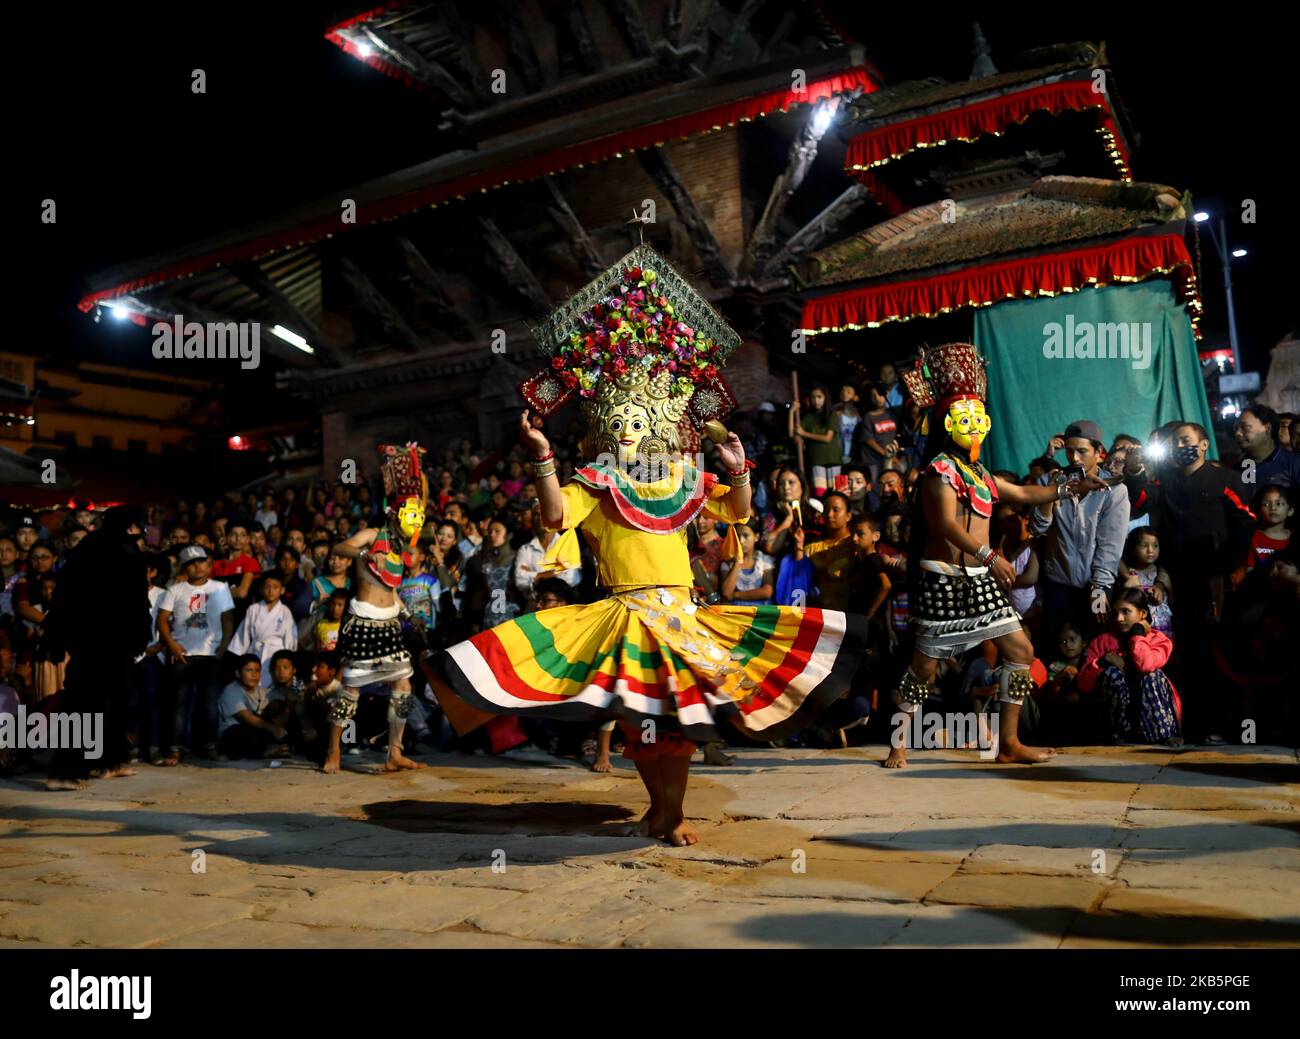 Nepalese mask dancer performs traditional Mahakali dance during the second day of Indra Jatra festival at the premises of Hanuman Dhoka Durbar Square in Kathmandu, Nepal on September 11, 2019. The eight-day long Indra Jatra festival falls in September and is one of the most exciting and revered festivals of the Newar community of the Kathmandu Valley. (Photo by Saroj Baizu/NurPhoto) Stock Photo